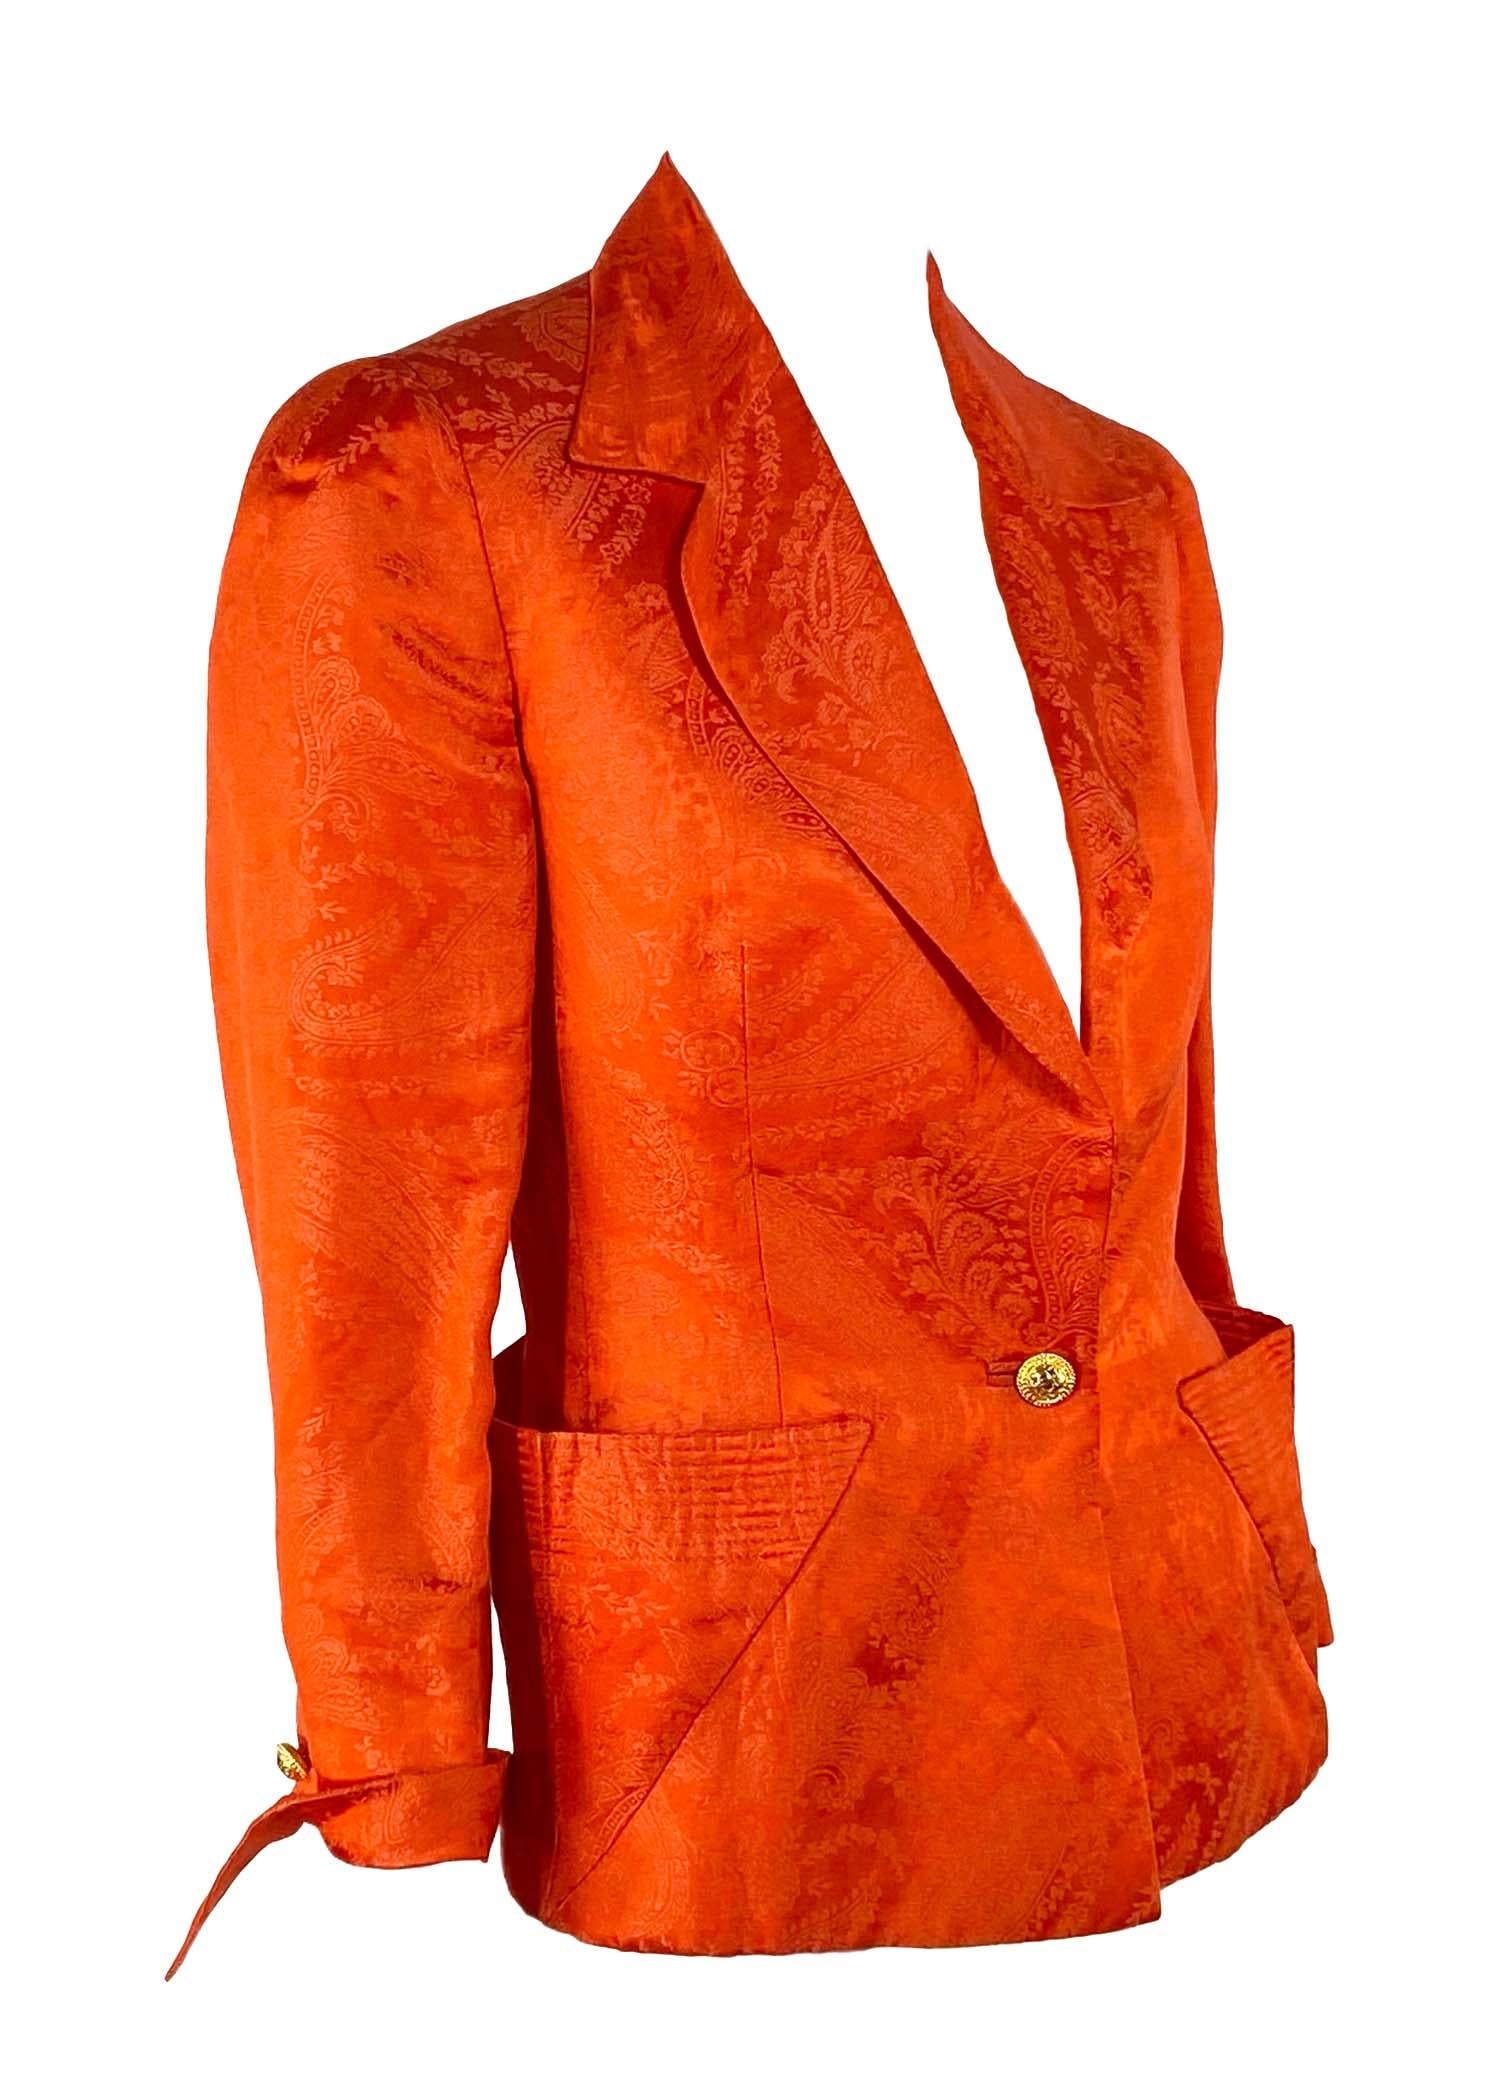 S/S 1991 Gianni Versace Couture Runway Orange Silk Paisley Print Blazer In Good Condition In West Hollywood, CA